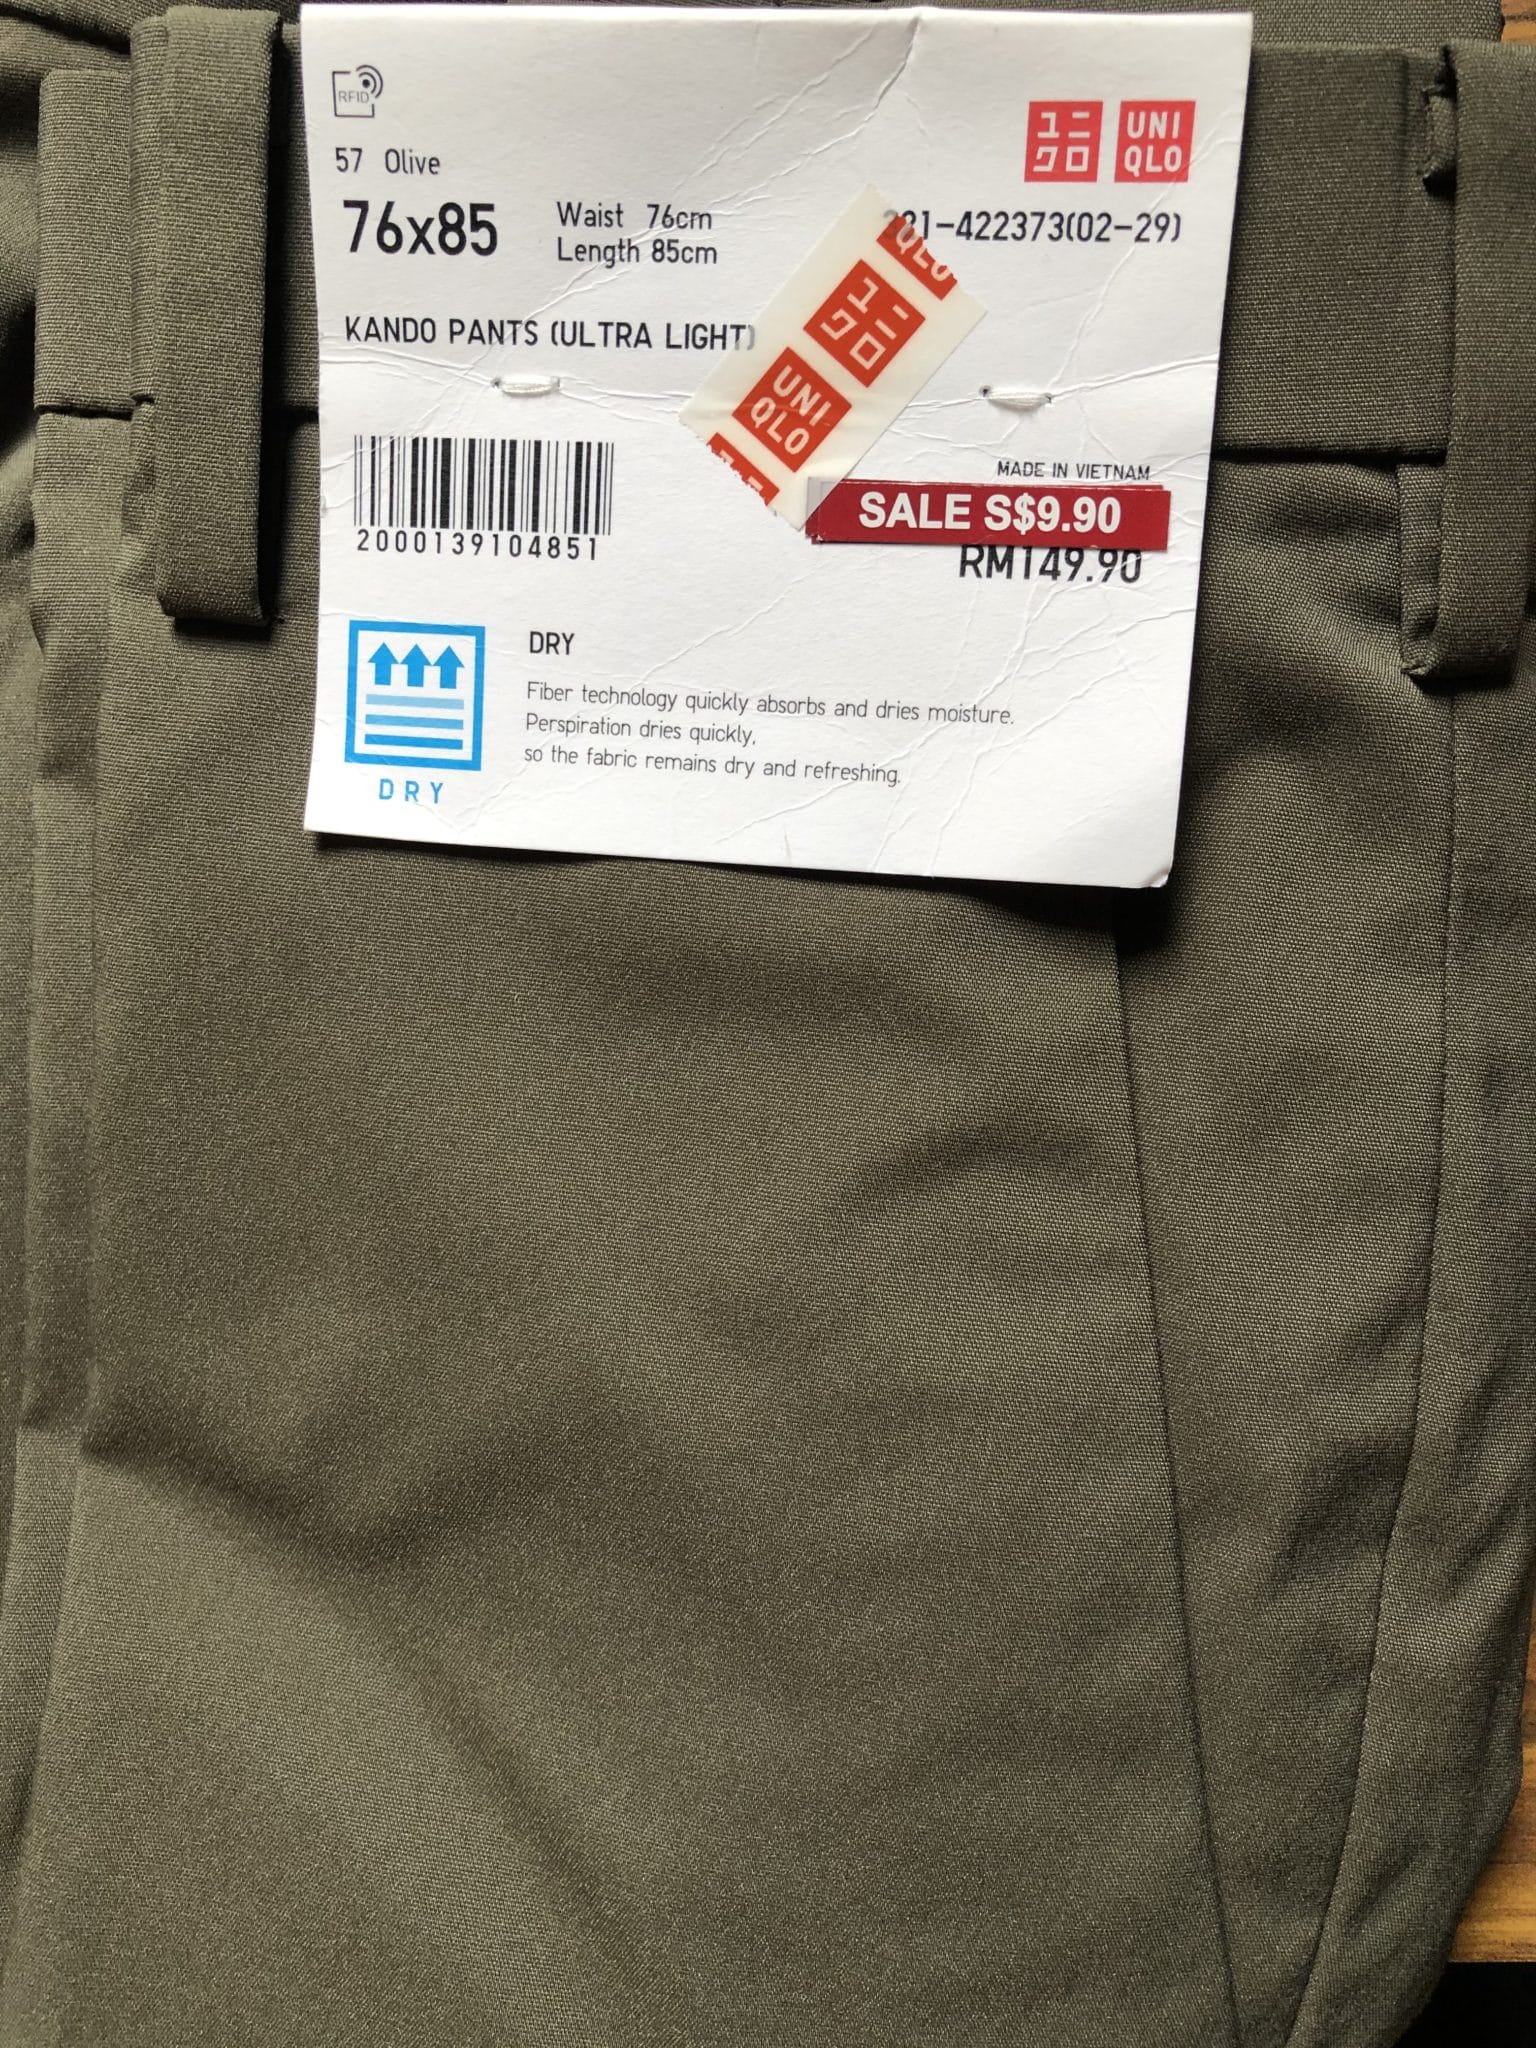 3 Tips To Save Money At UNIQLO – thefrugalstudent